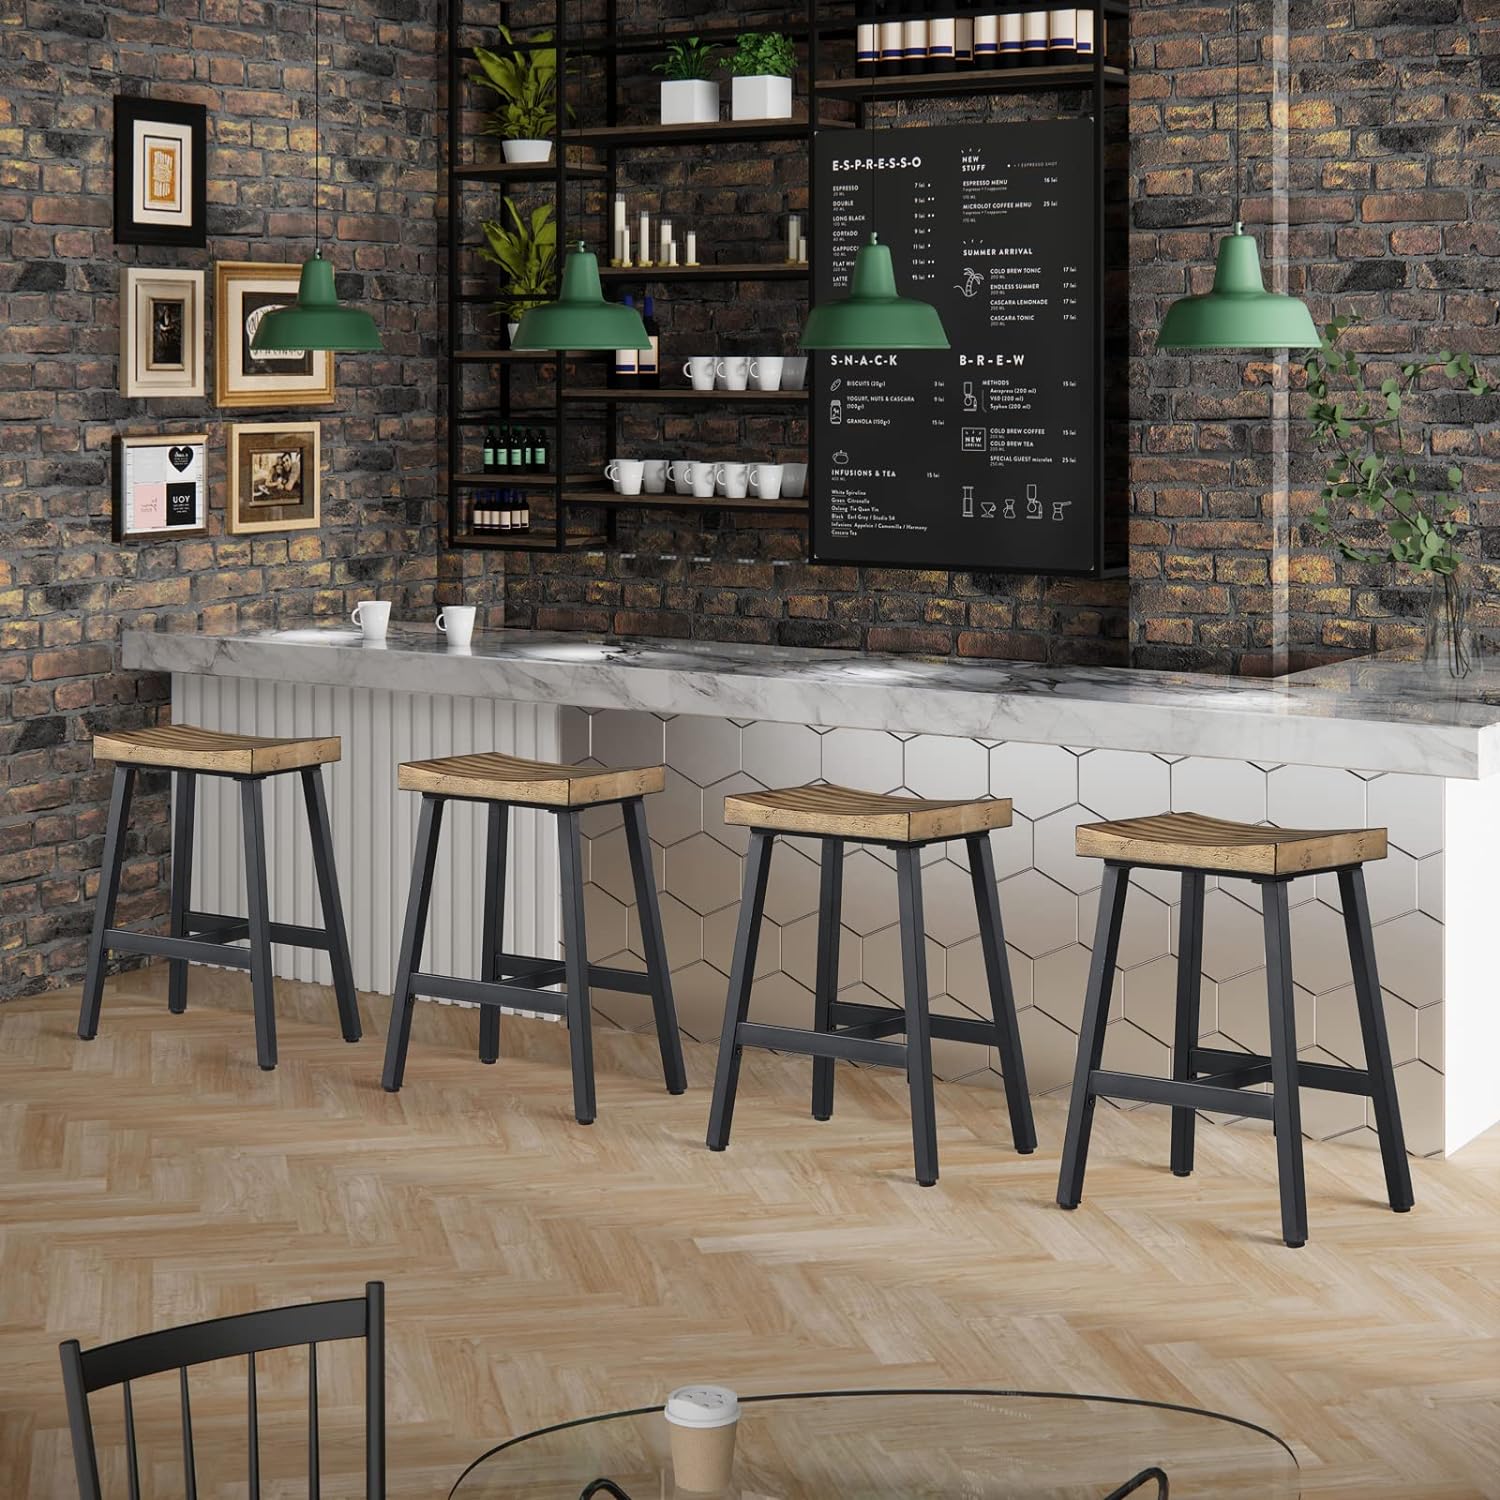 Rustic Industrial Wood Bar Stools （Set of 2）EXTRA 55%OFF AT CHECKOUT